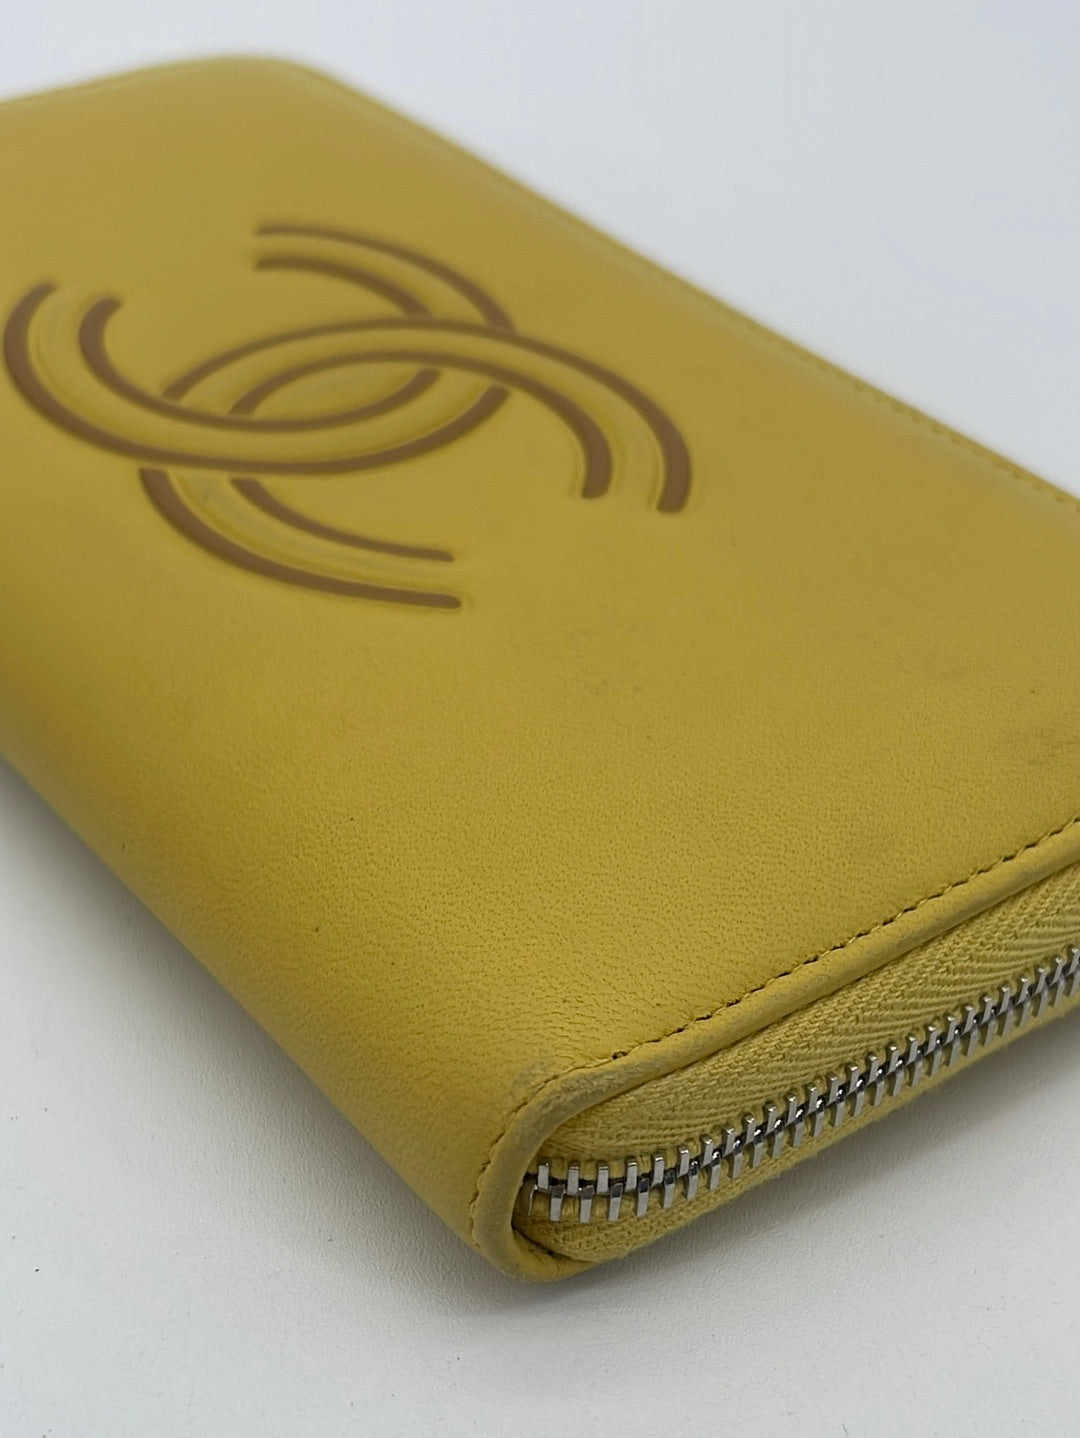 PRELOVED Chanel Yellow Timeless CC Zip Around Wallet 23859785 052223